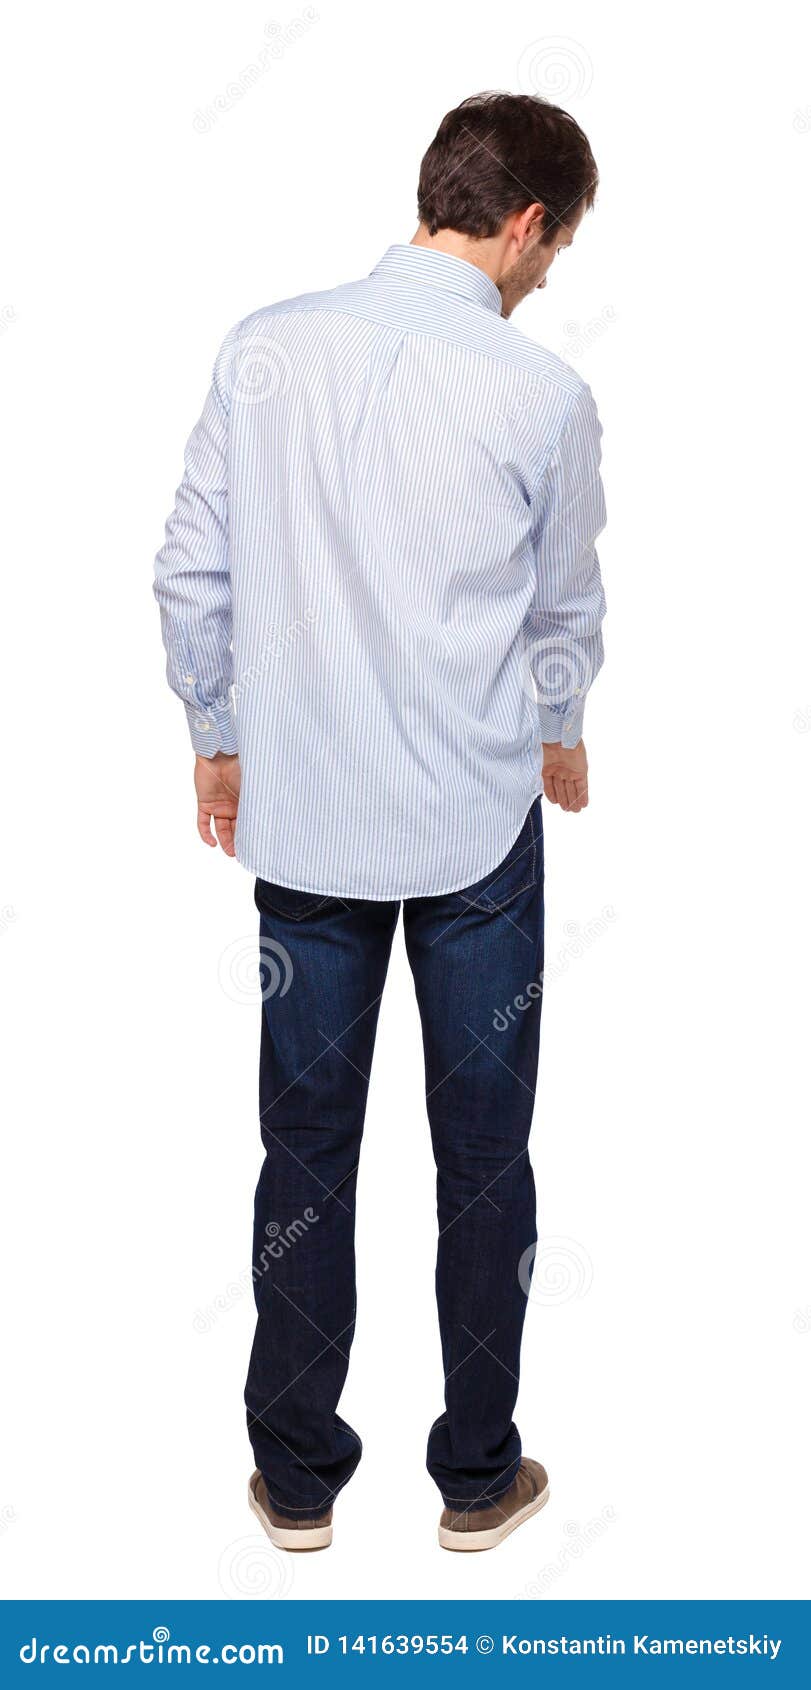 Back View of a Man in Jeans Points His Hand Upwards Stock Photo - Image ...